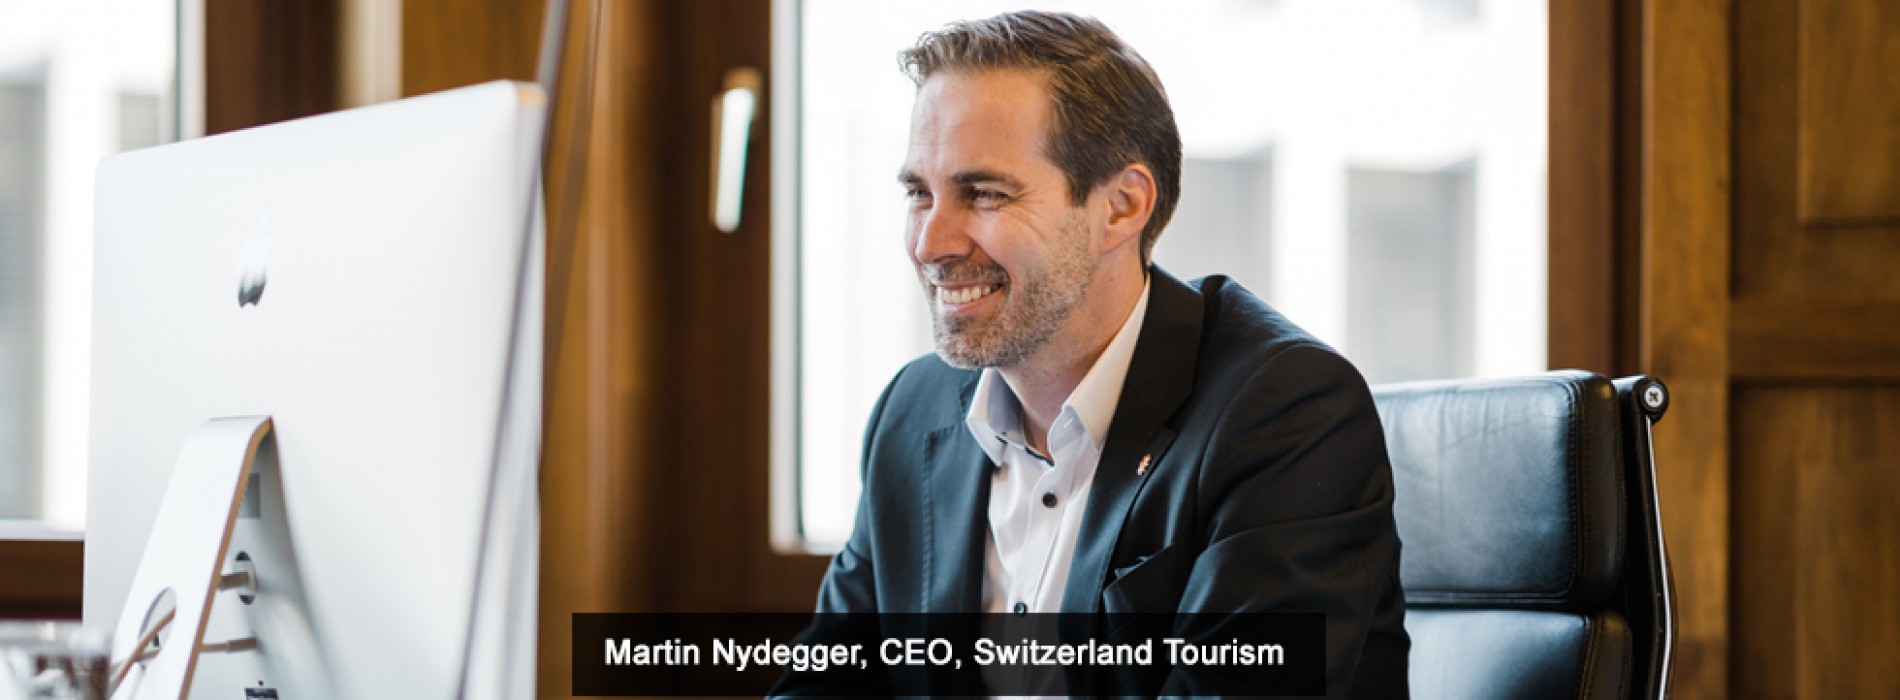 Martin Nydegger appointed as the new CEO of Switzerland Tourism